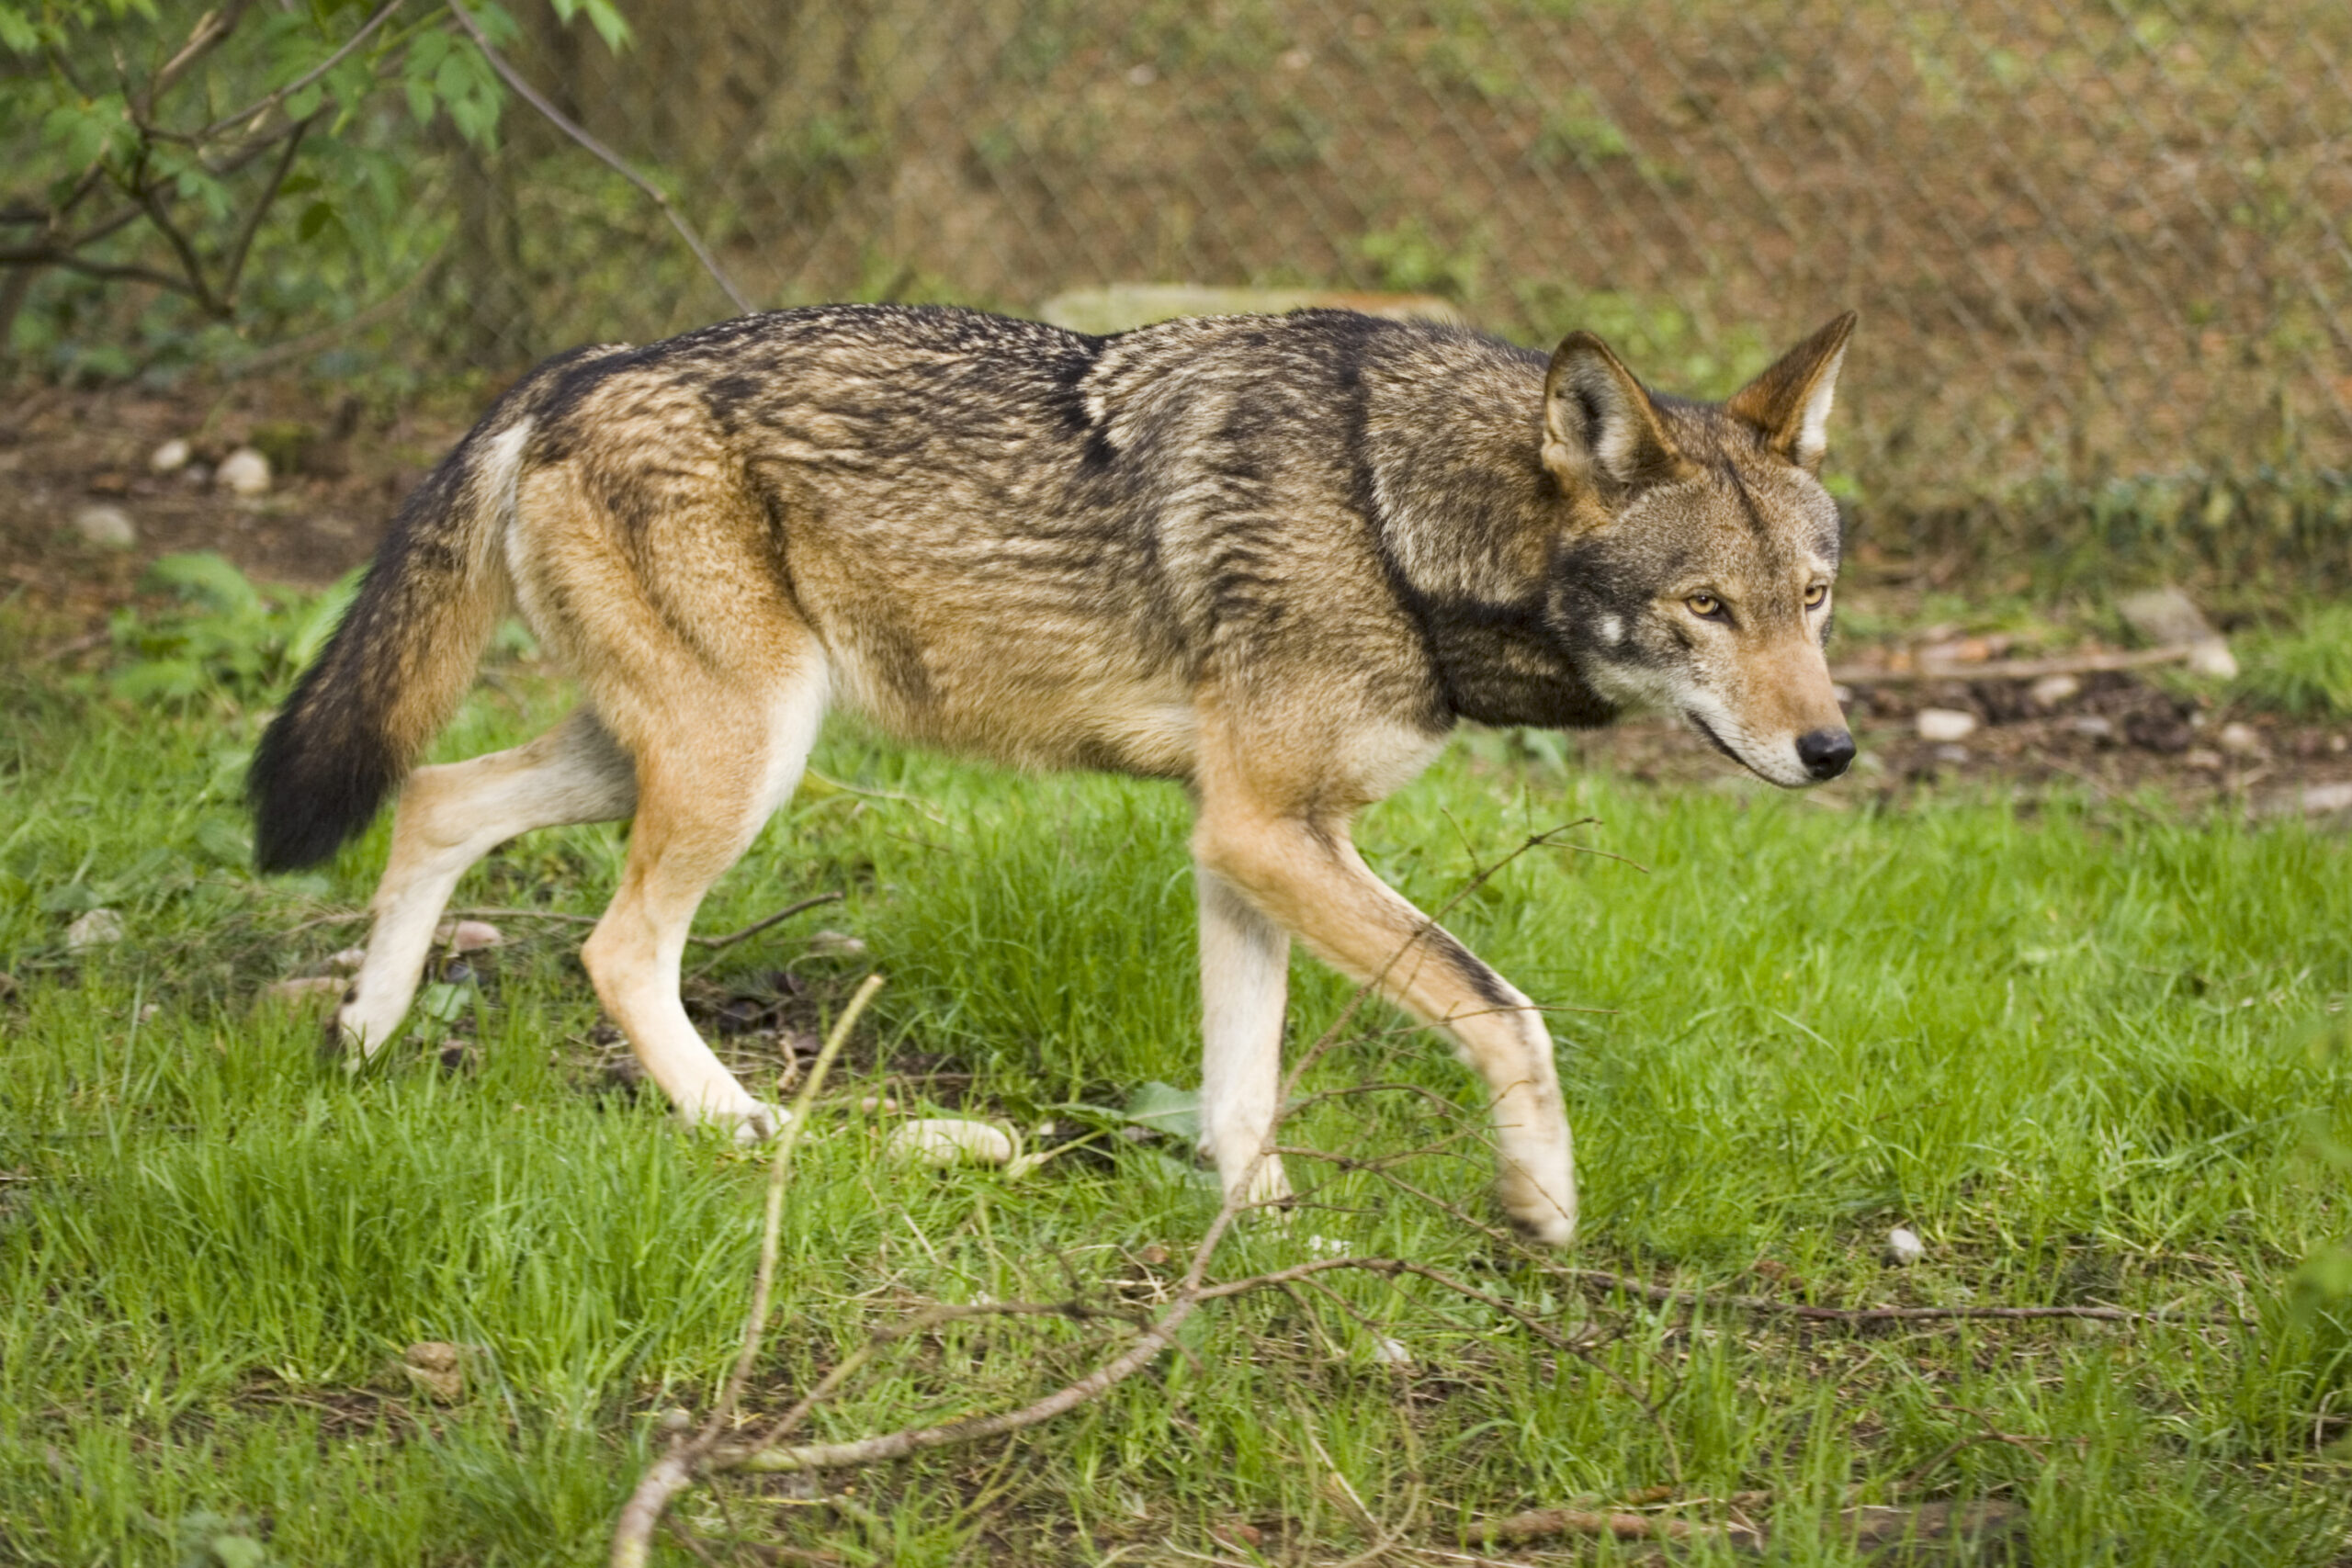 There are hundreds of red wolves living in captive breeding facilities throughout the United States